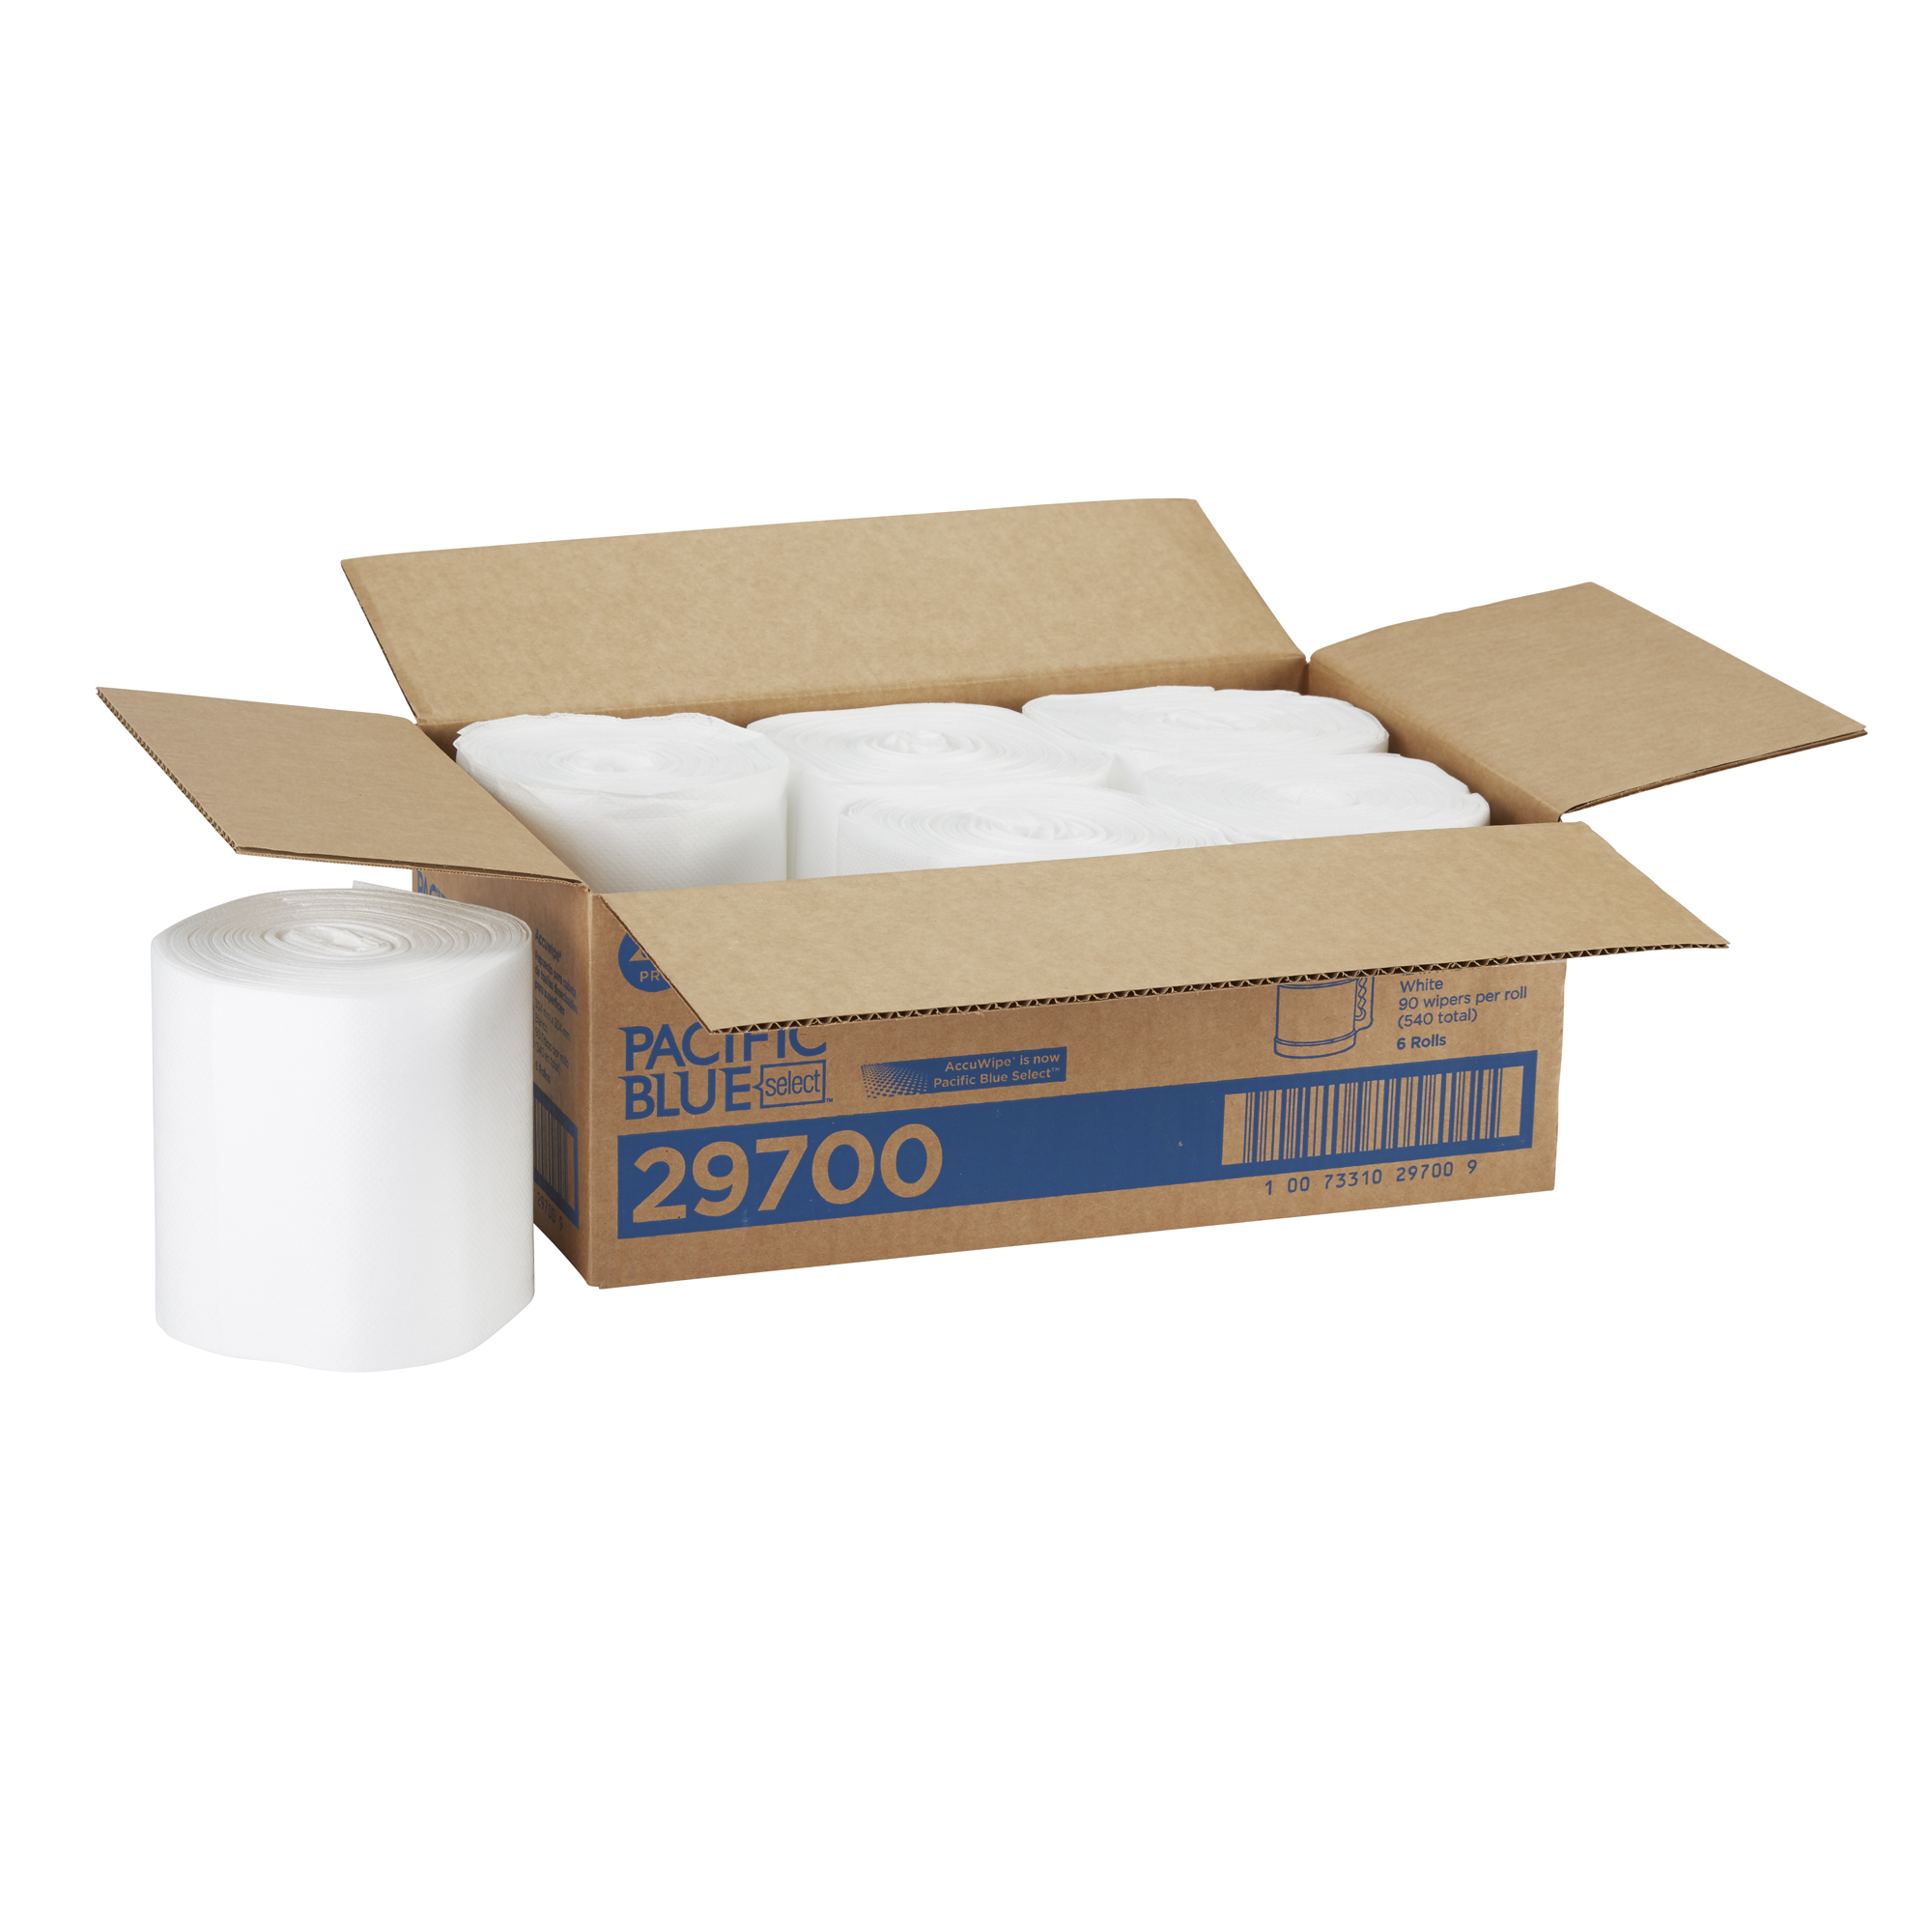 GP PRO Pacific Blue Select# Disposable Surface System Refill, Centerpull Roll, White